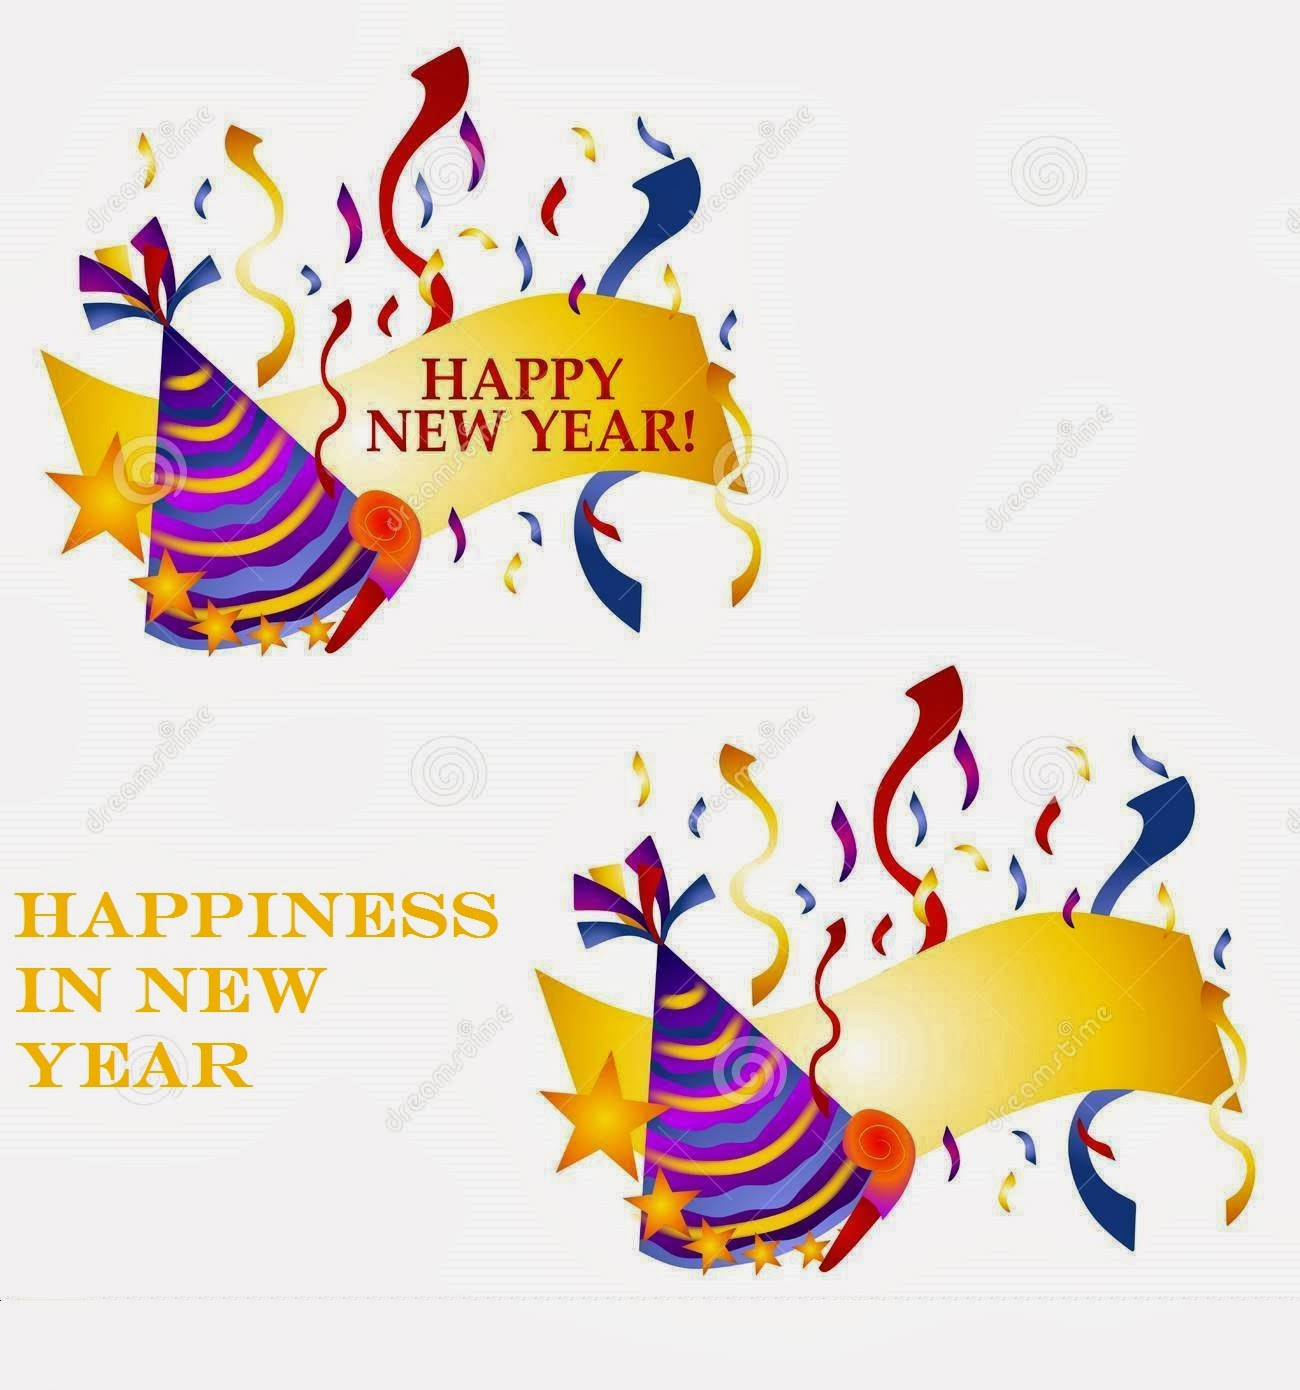 Best Happy New Year Clip Art And Messages 2015   Free Quotes Poems